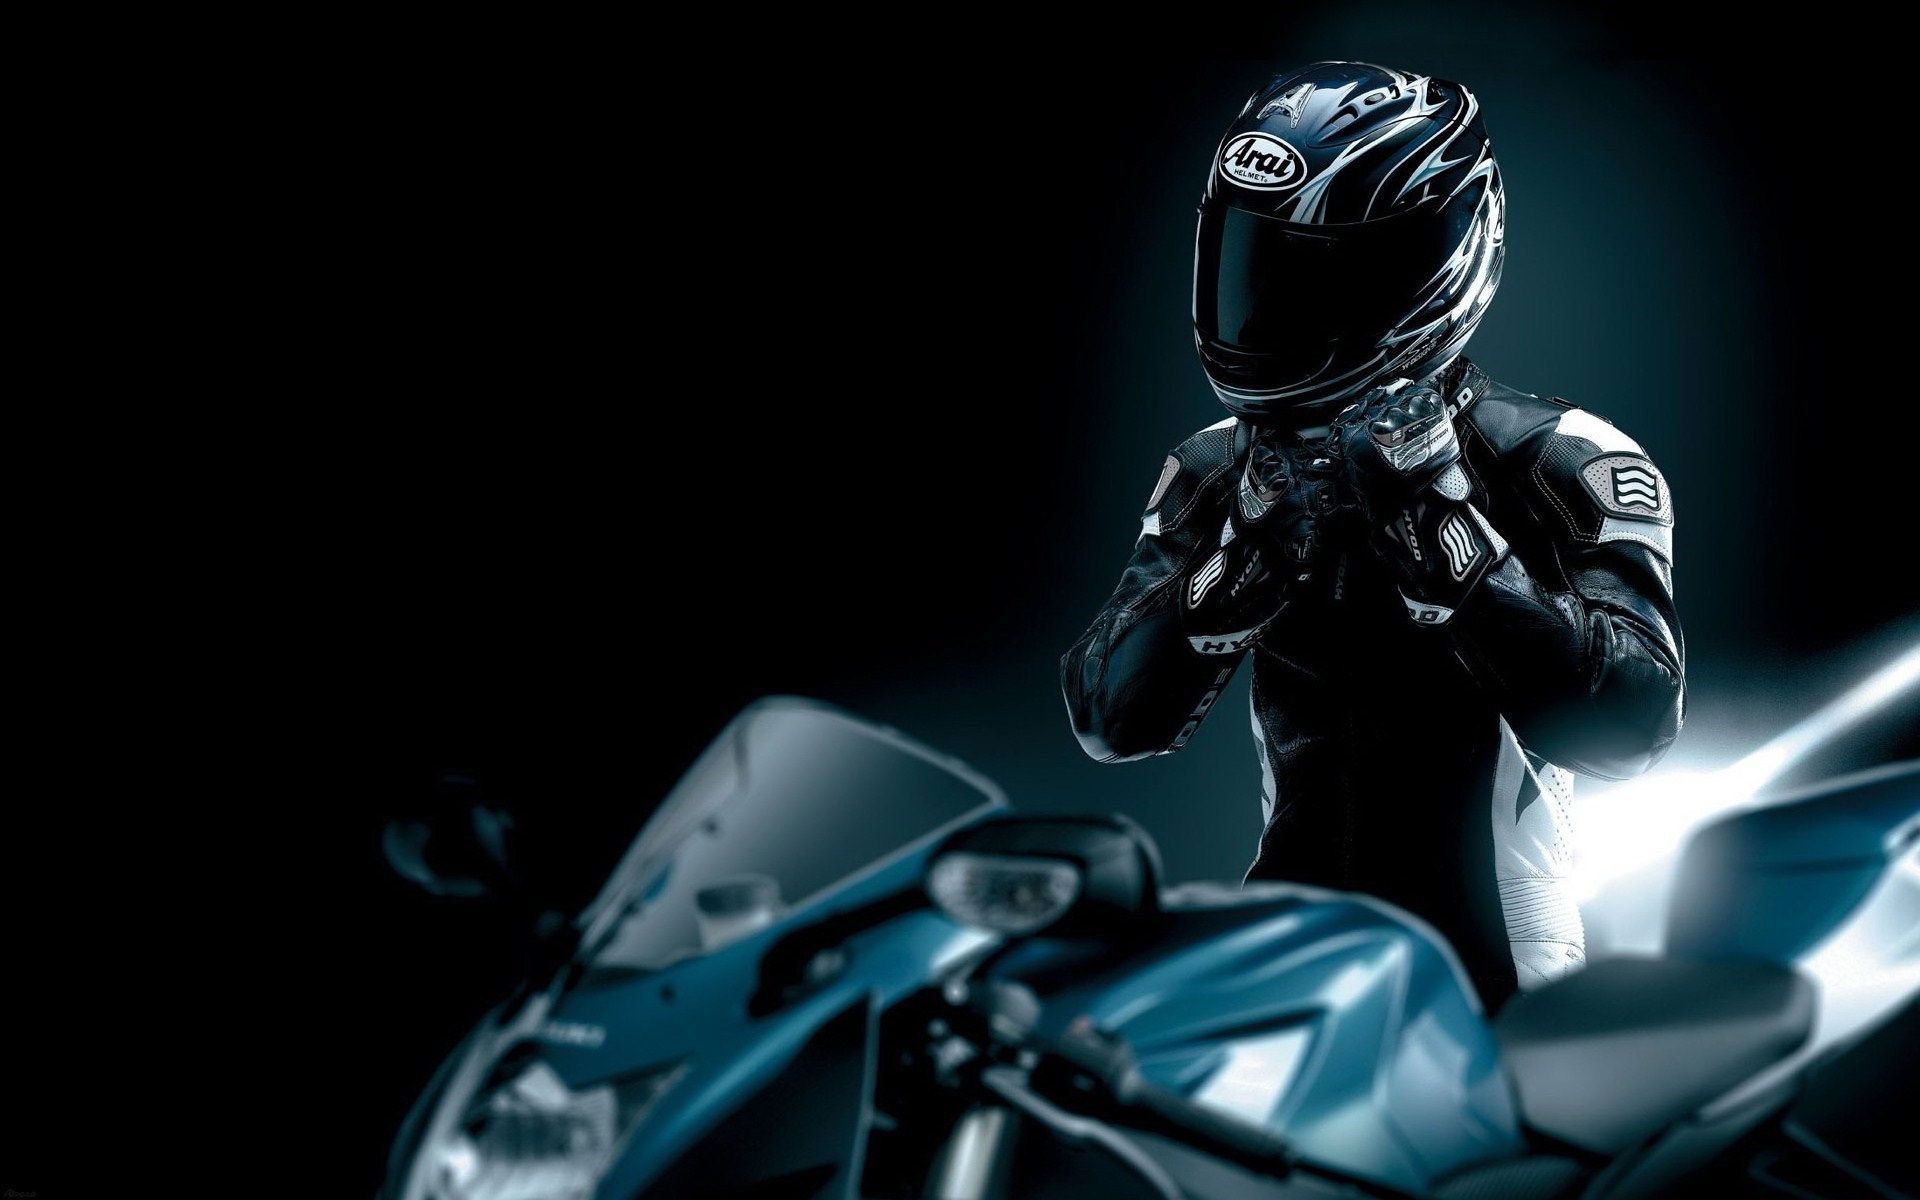 Motorcycle Rider Wallpaper Free Motorcycle Rider Background